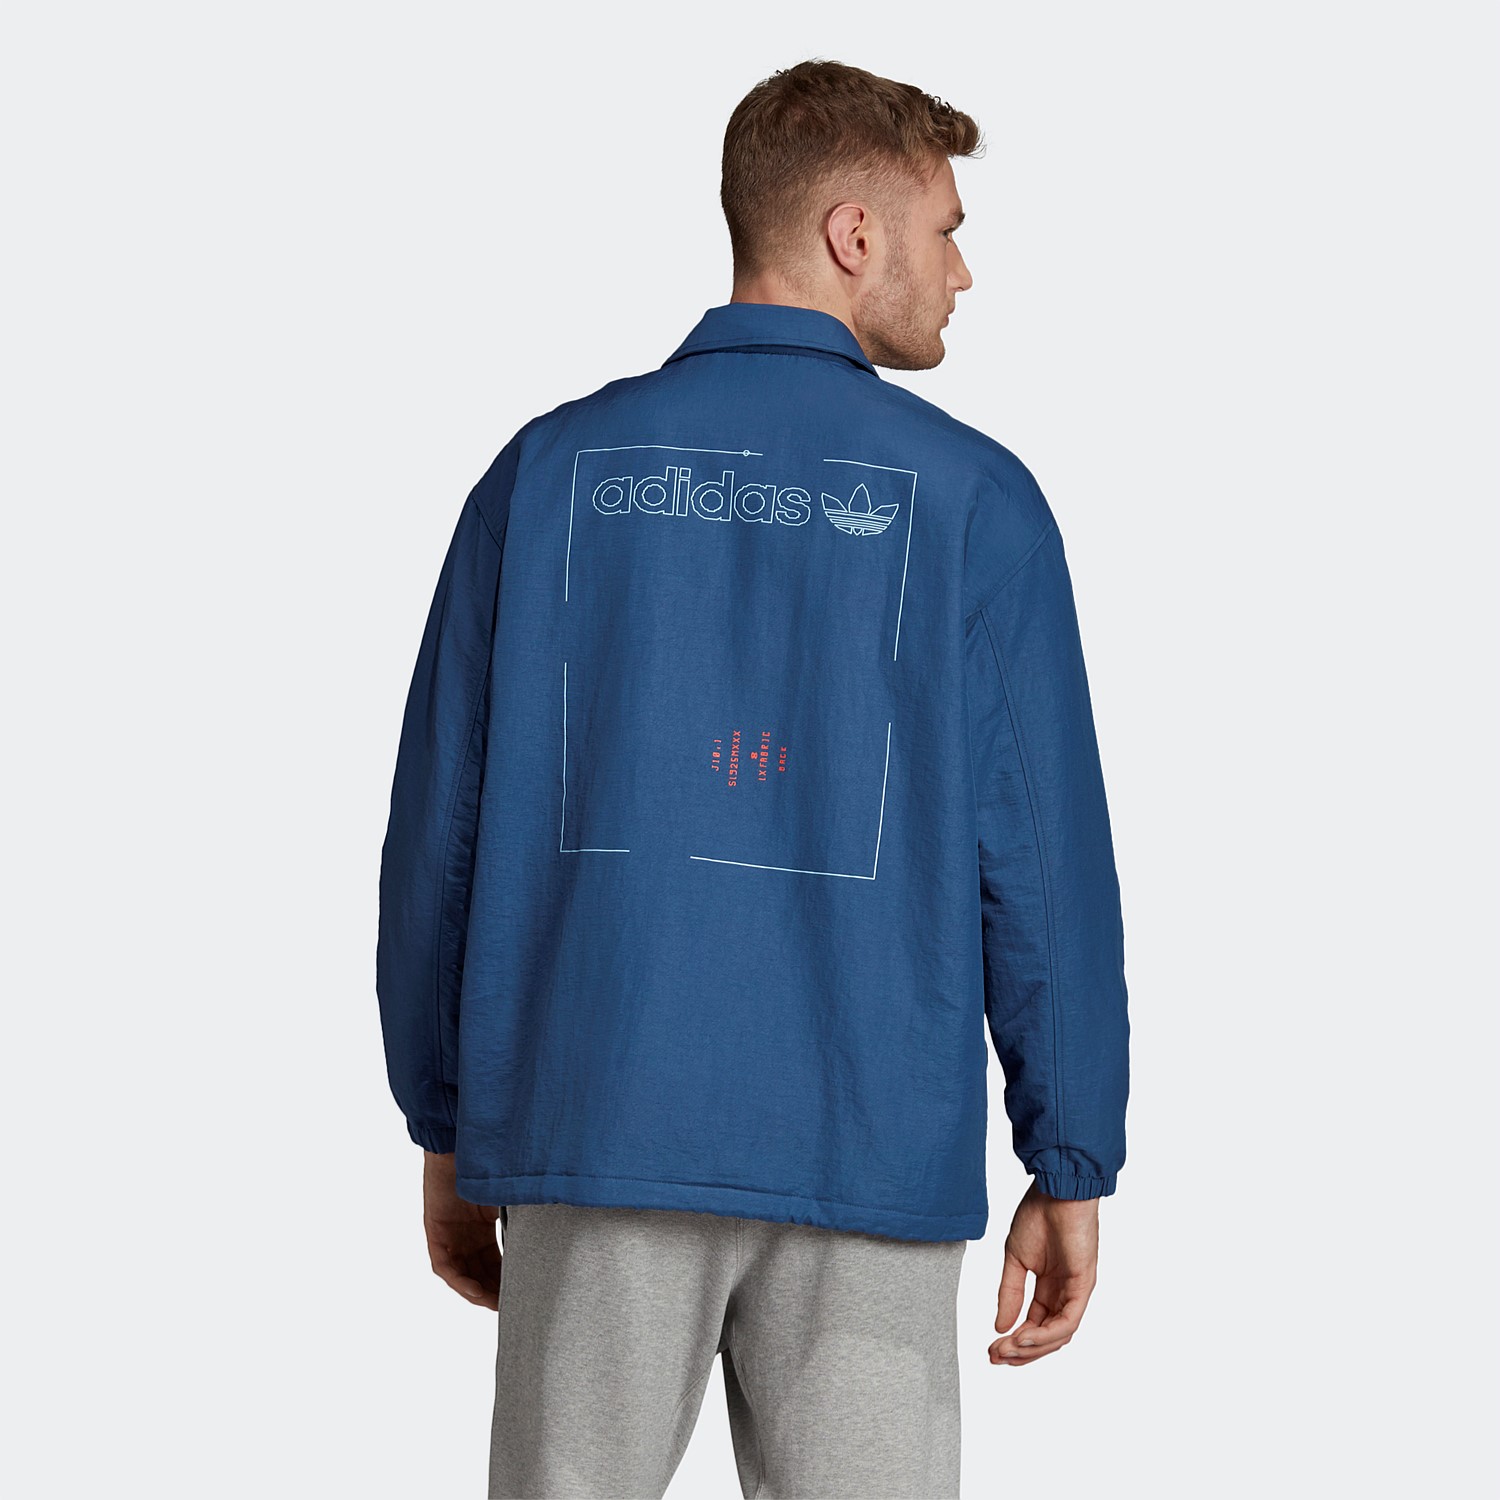 kaval graphic coach jacket